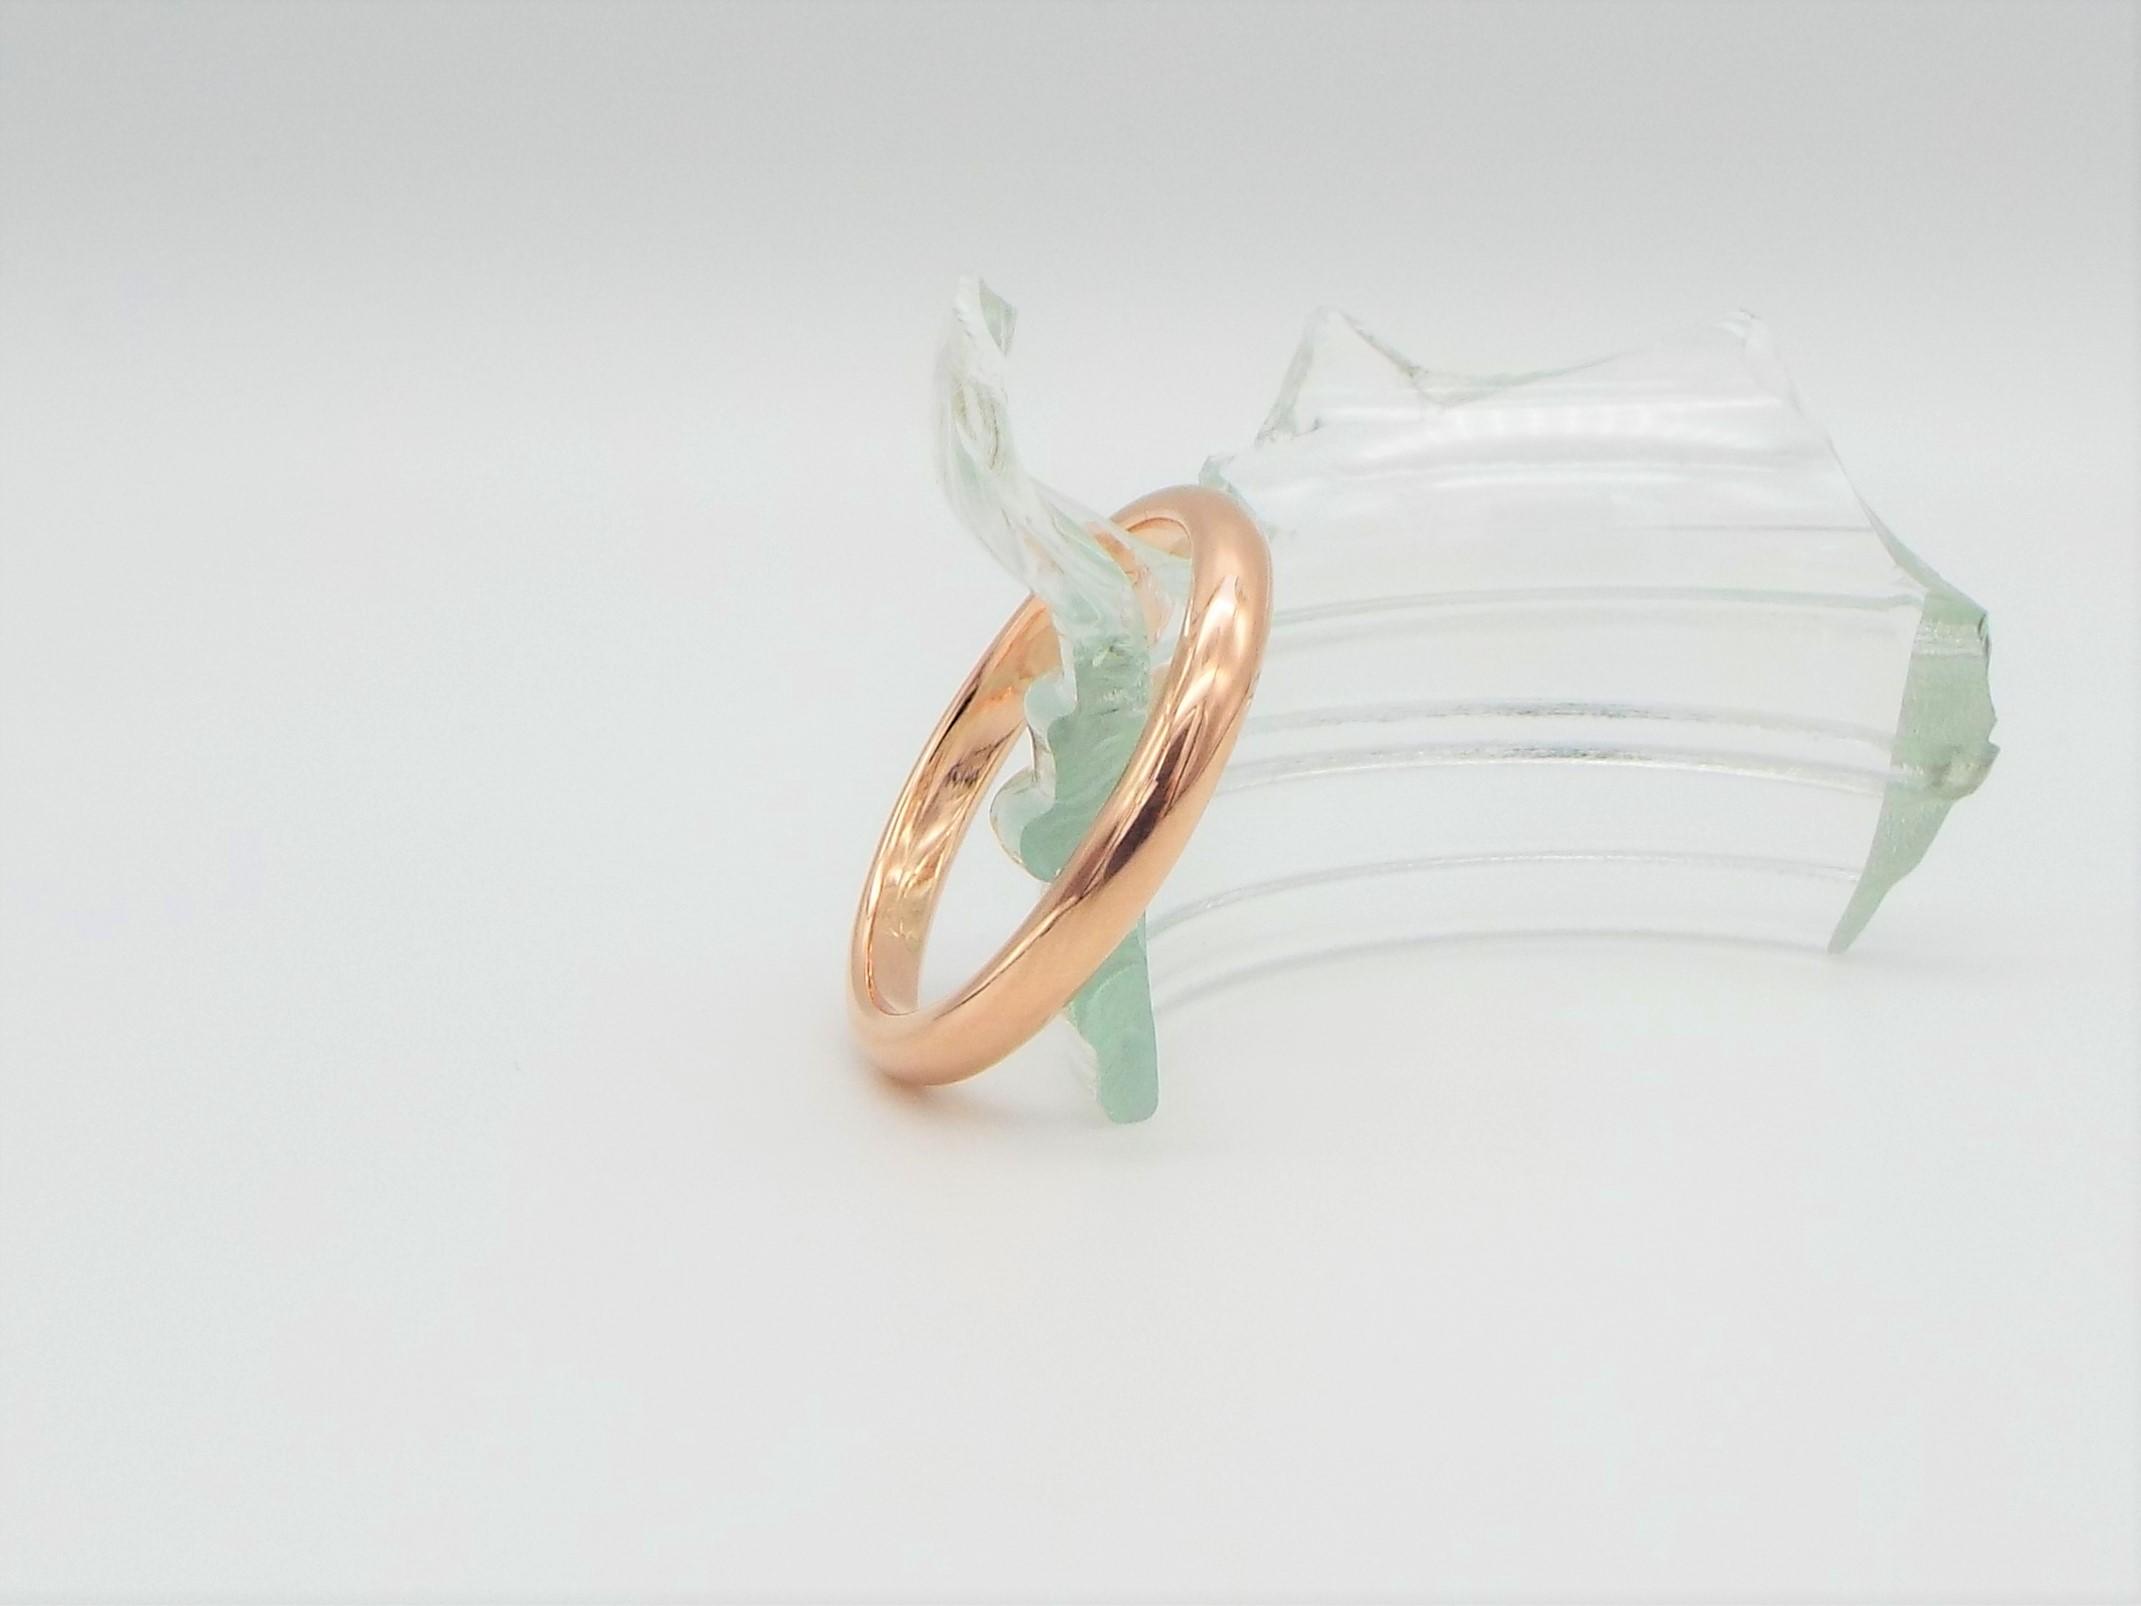 3mm wide D shaped rose gold wedding ring